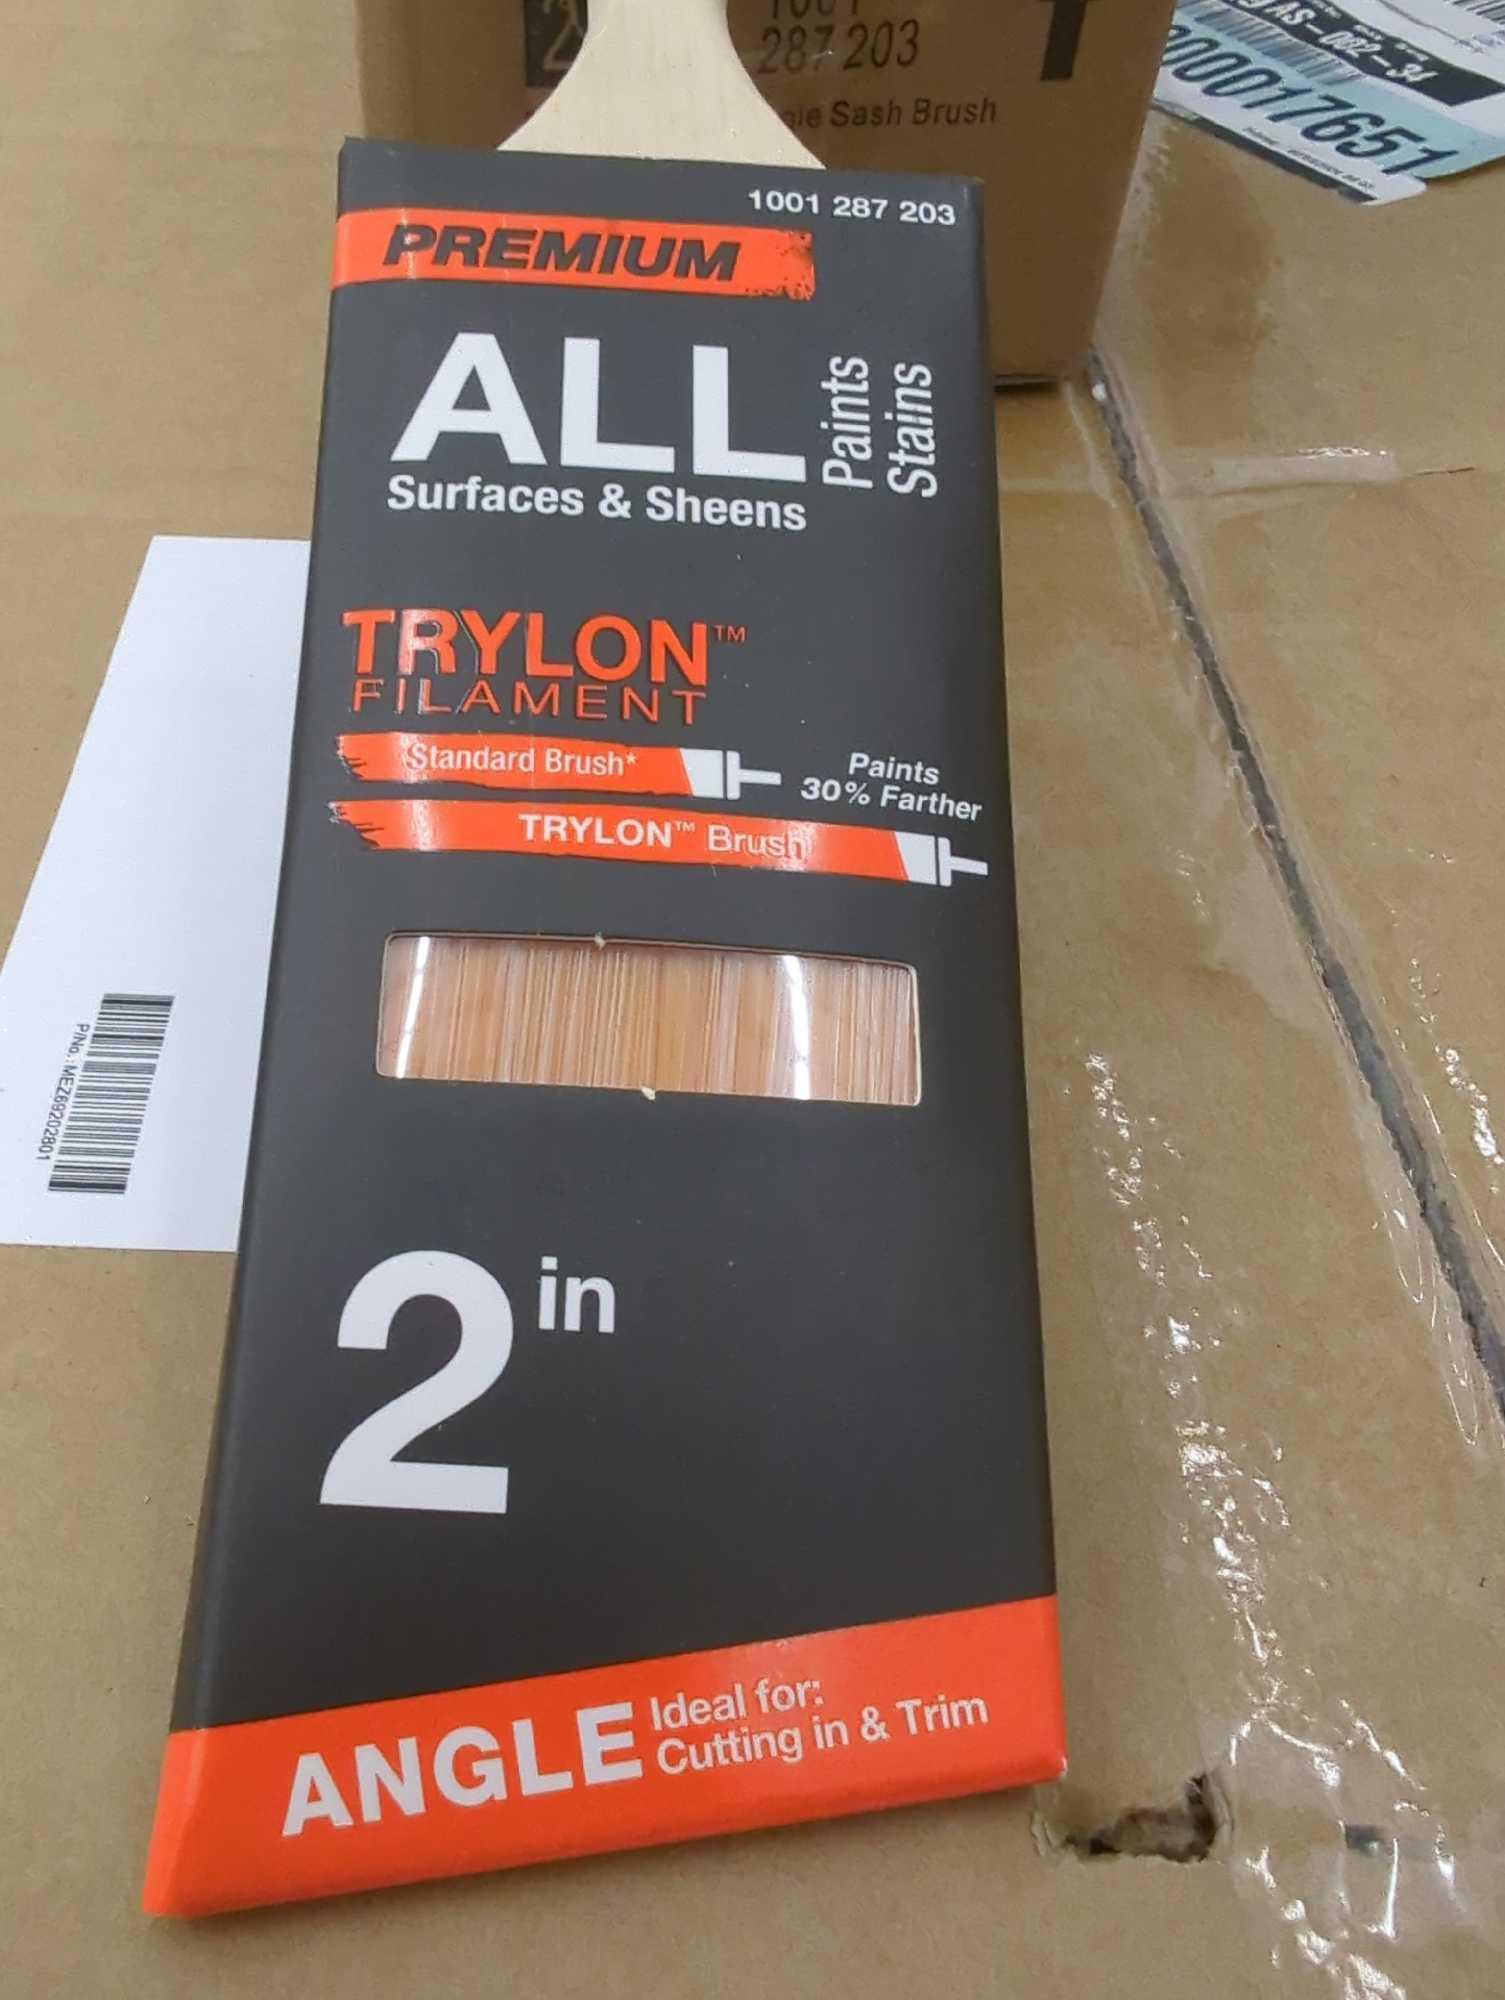 Box Lot of 6 Premium 2 in. Polyester Trylon Angled Sash Paint Brush, Appears to be New in Open Box